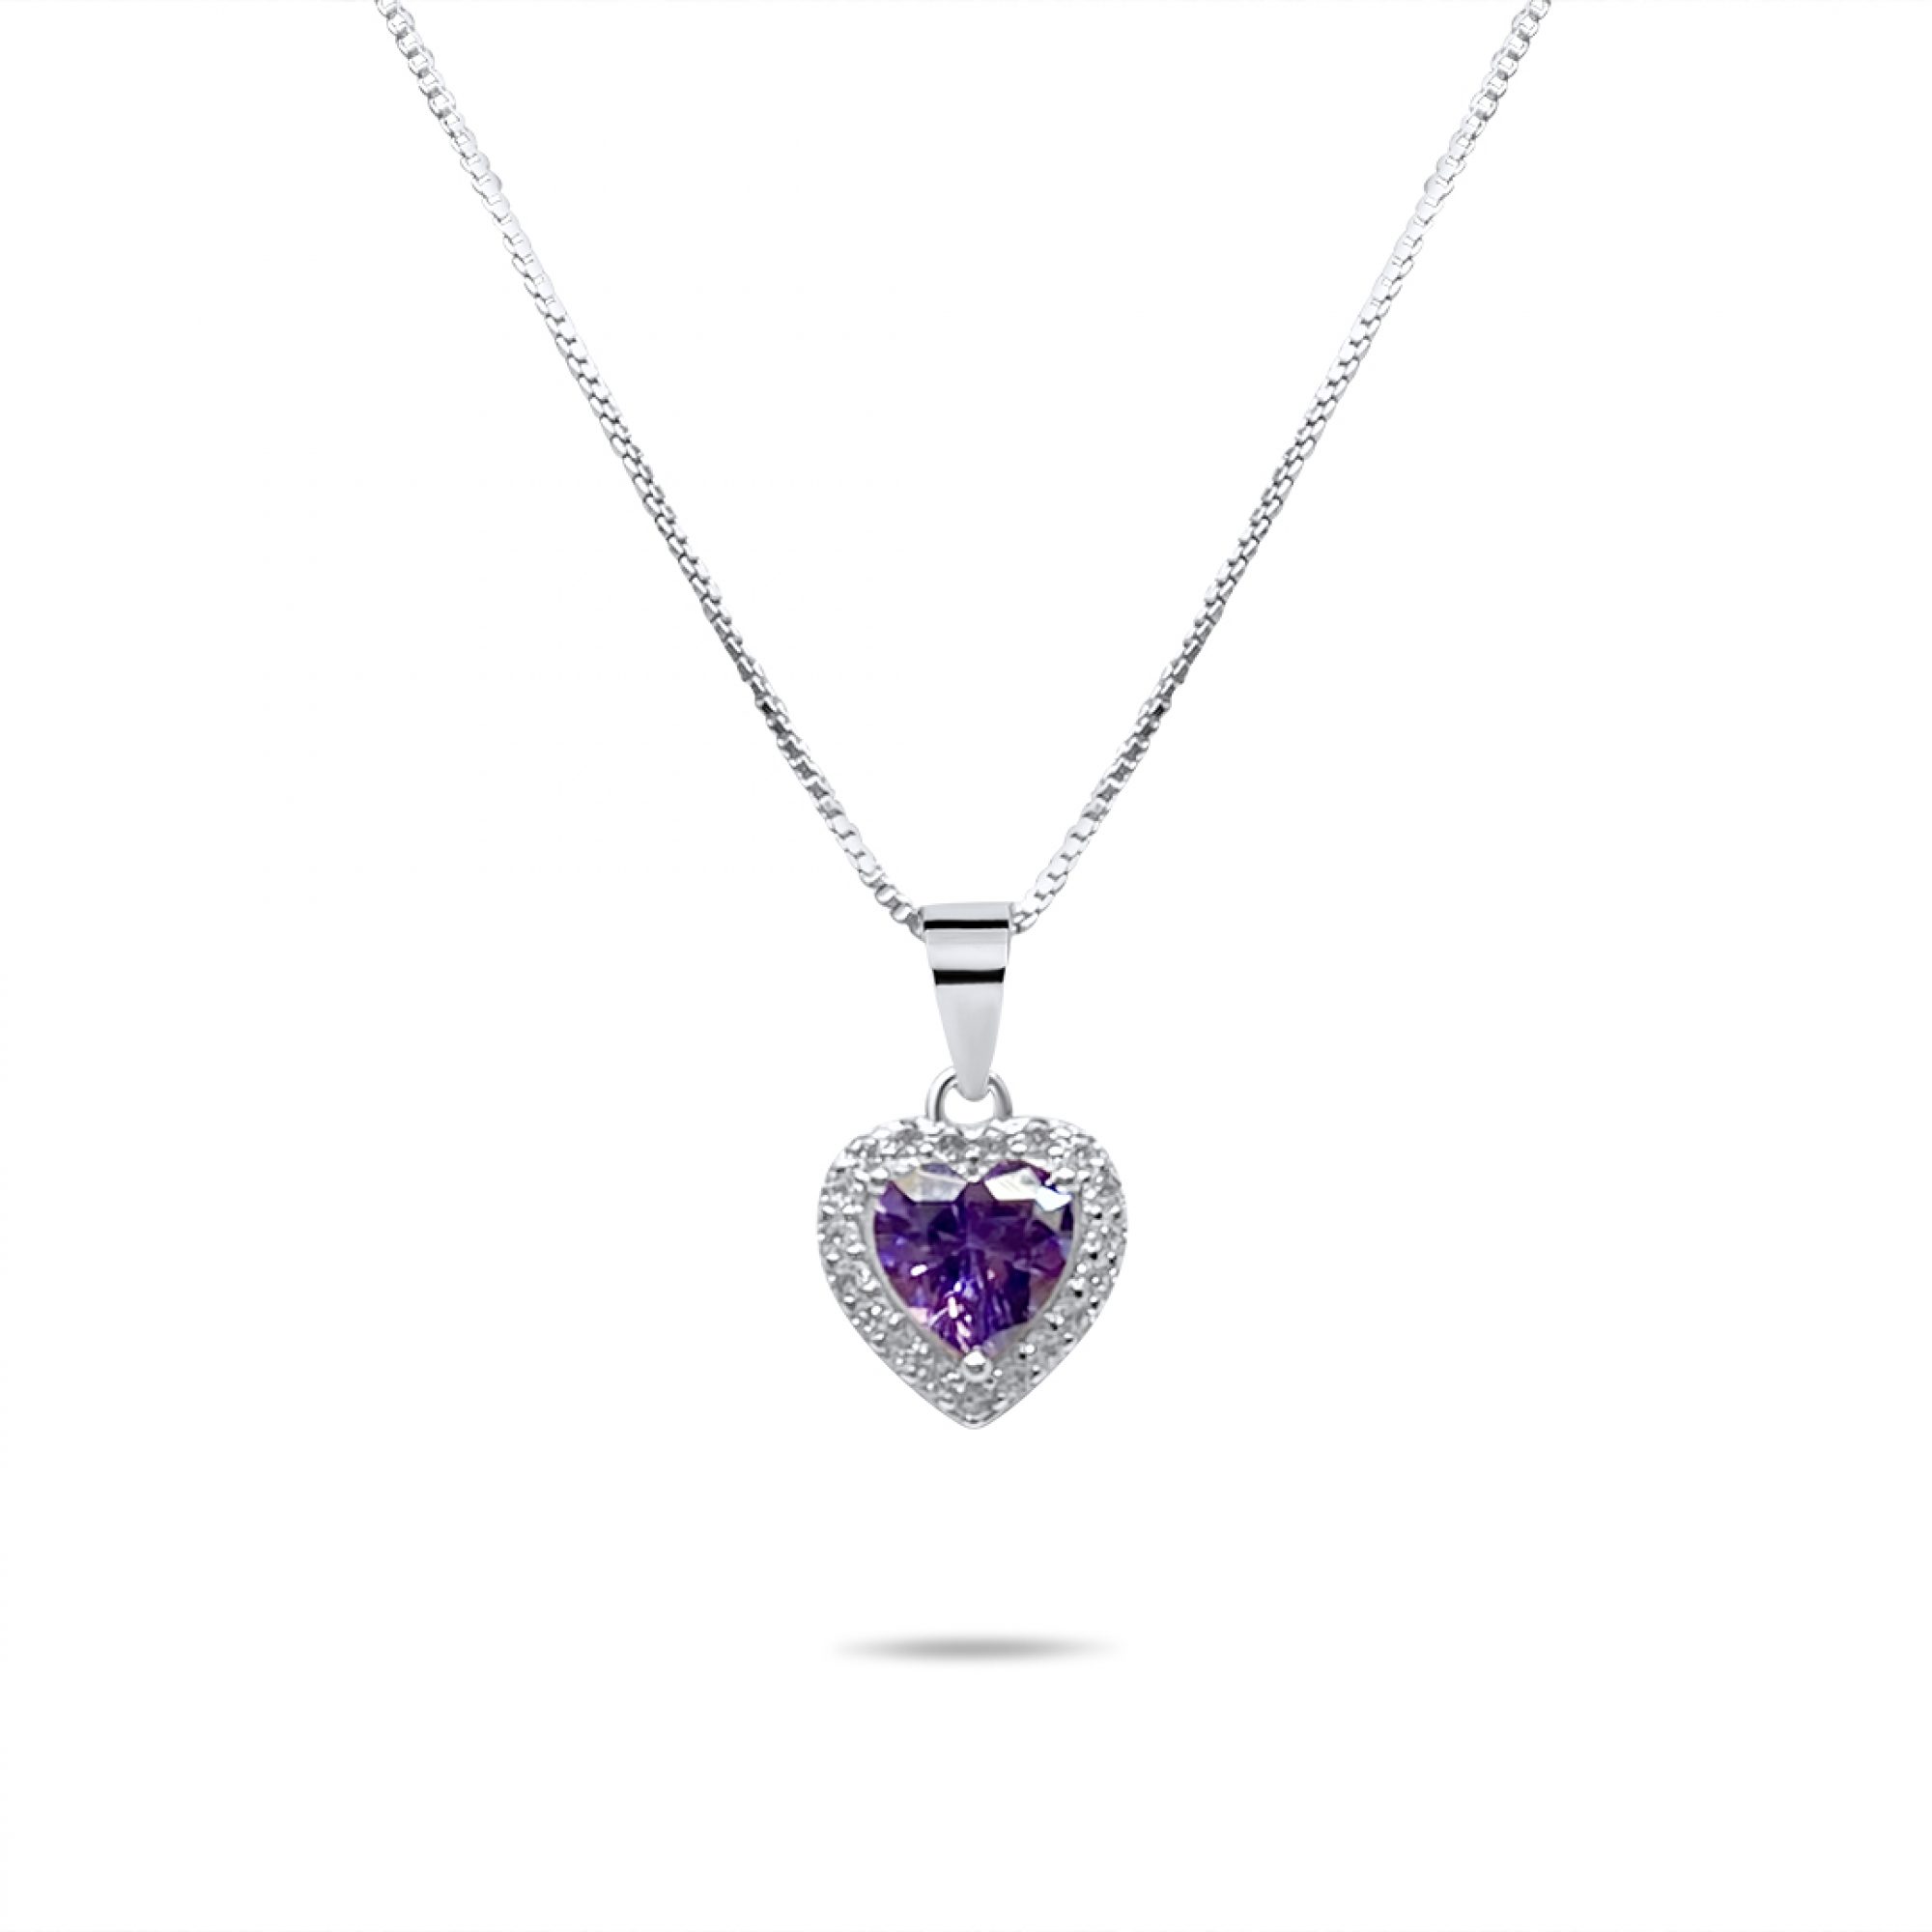 Heart necklace with amethyst and zircon stones